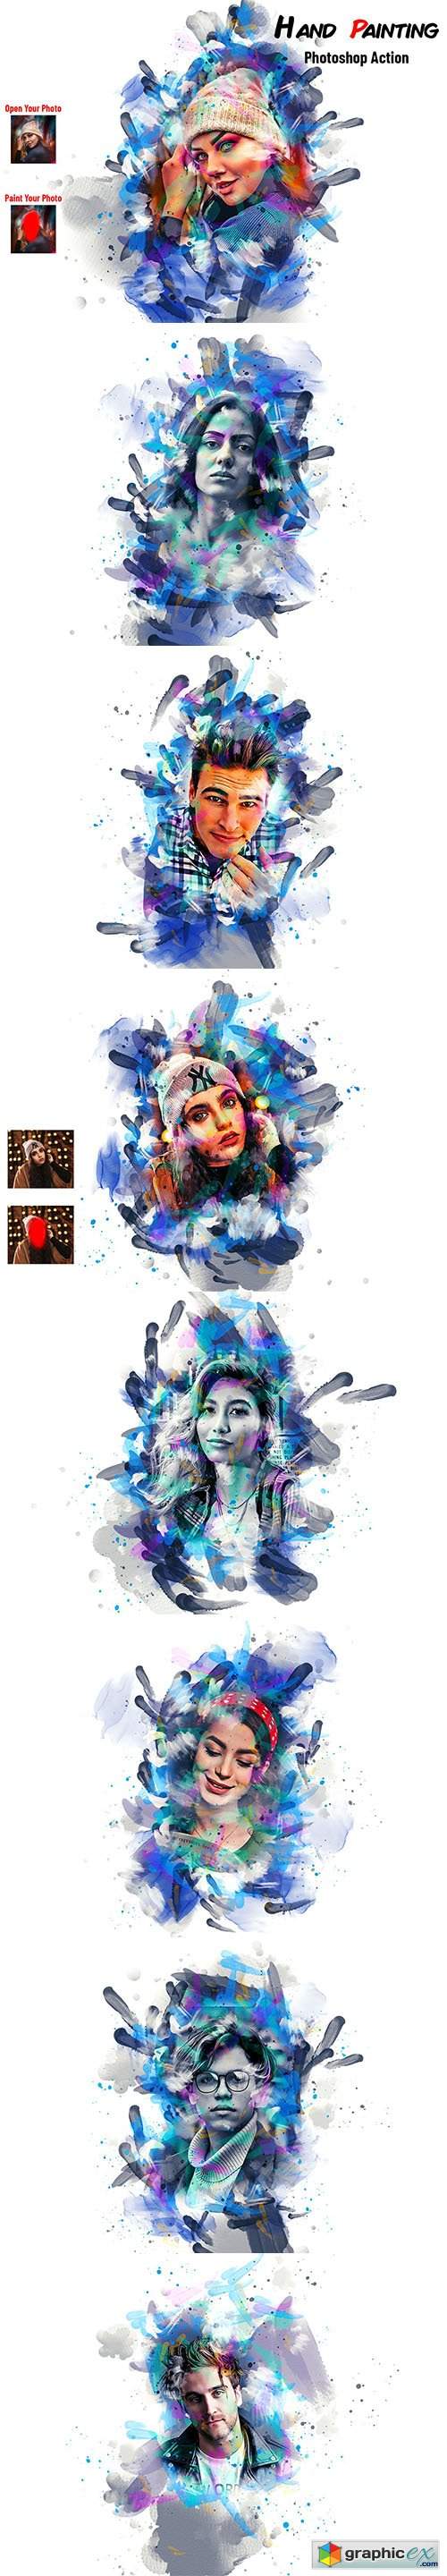 Hand Painting Photoshop Action 6745089